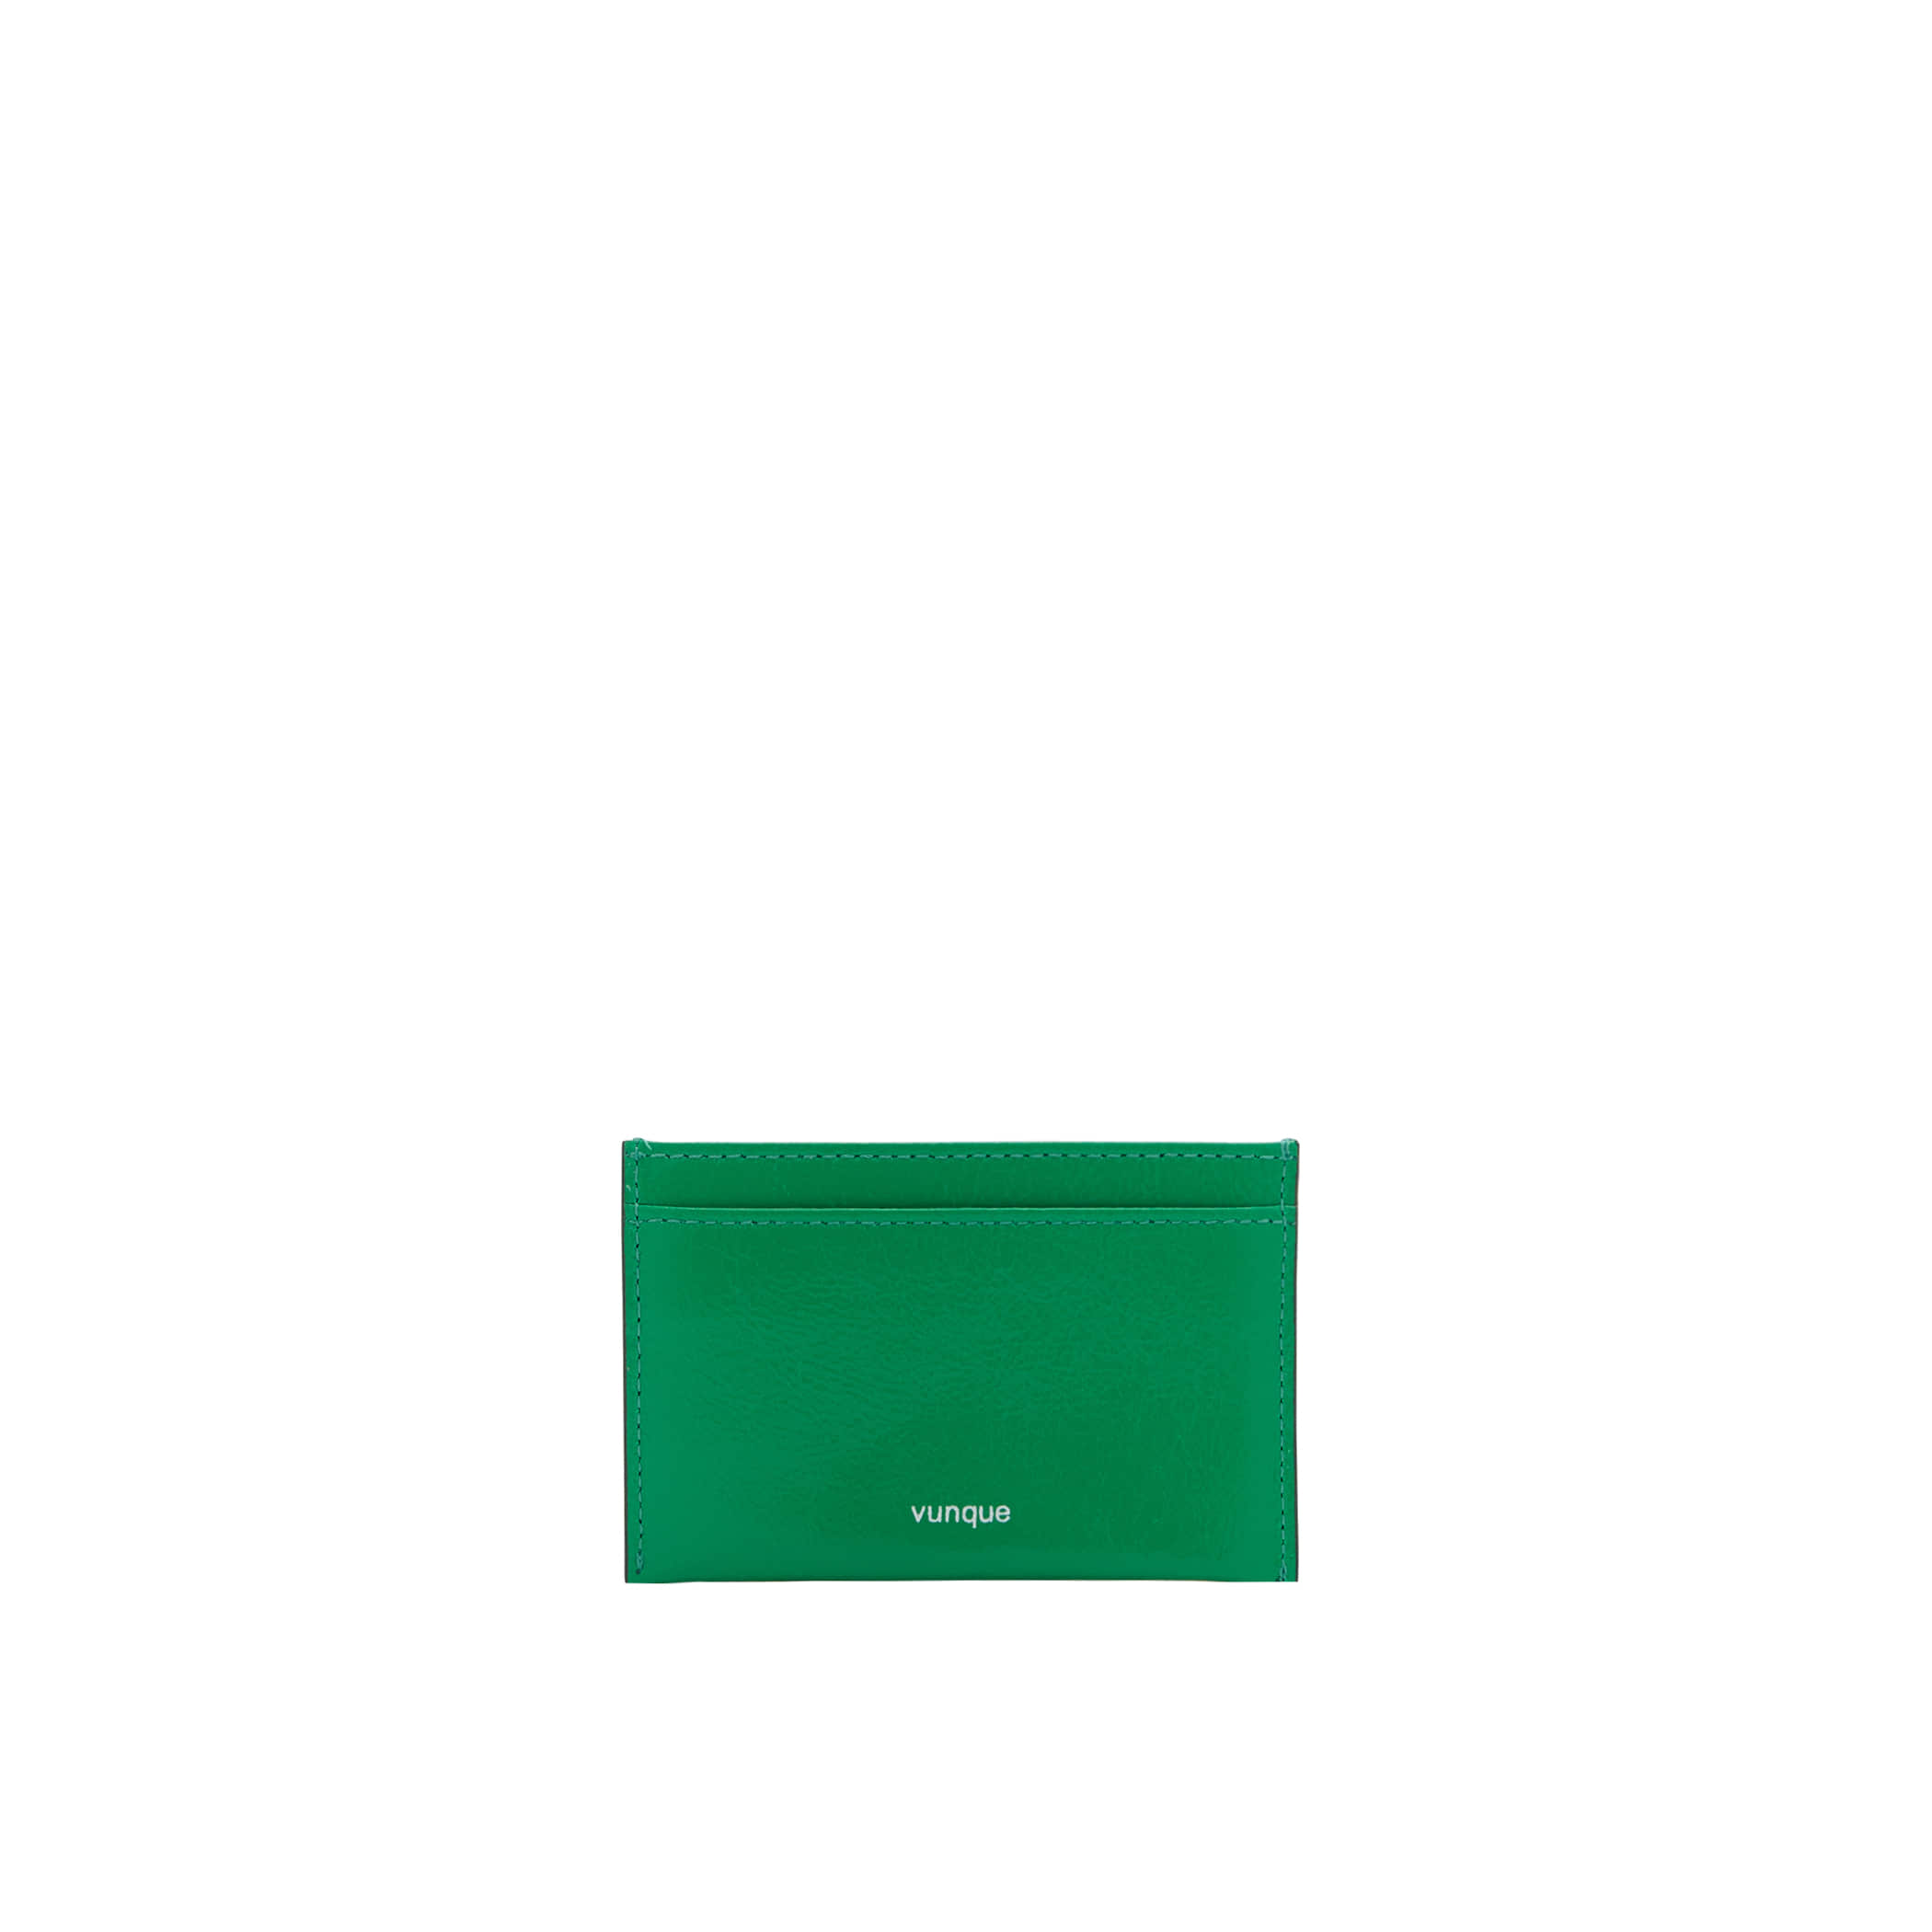 Occam Lune Card Wallet (오캄 룬 카드지갑) Forest Green